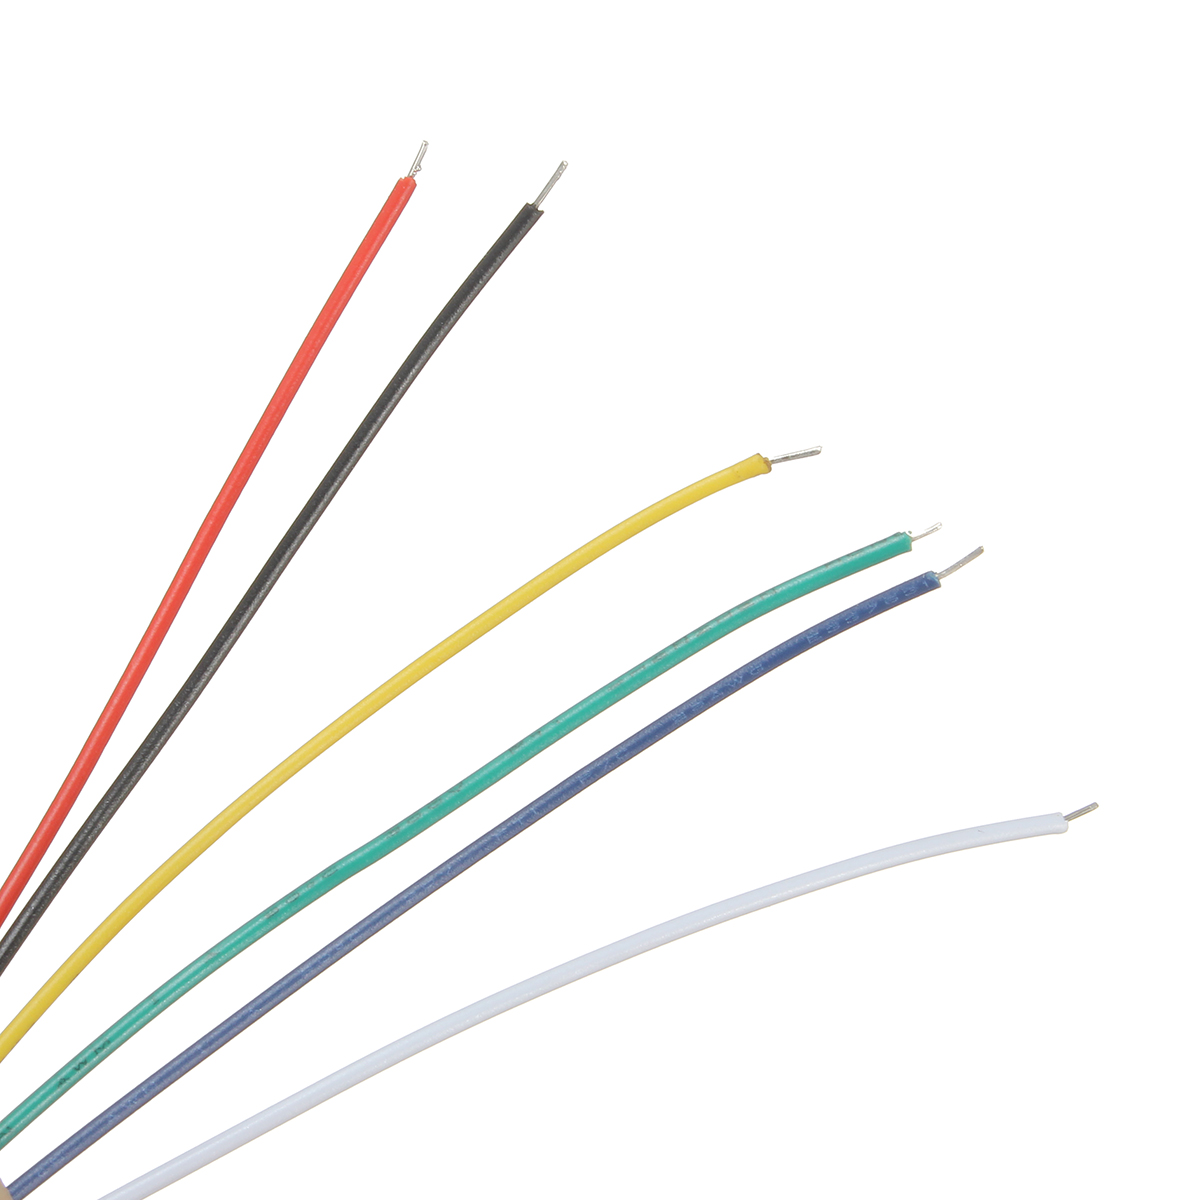 Excellwayreg-Mini-Micro-JST-15mm-ZH-6-Pin-Connector-Plug-and-Wires-Cables-15cm-10-Set-1170230-5